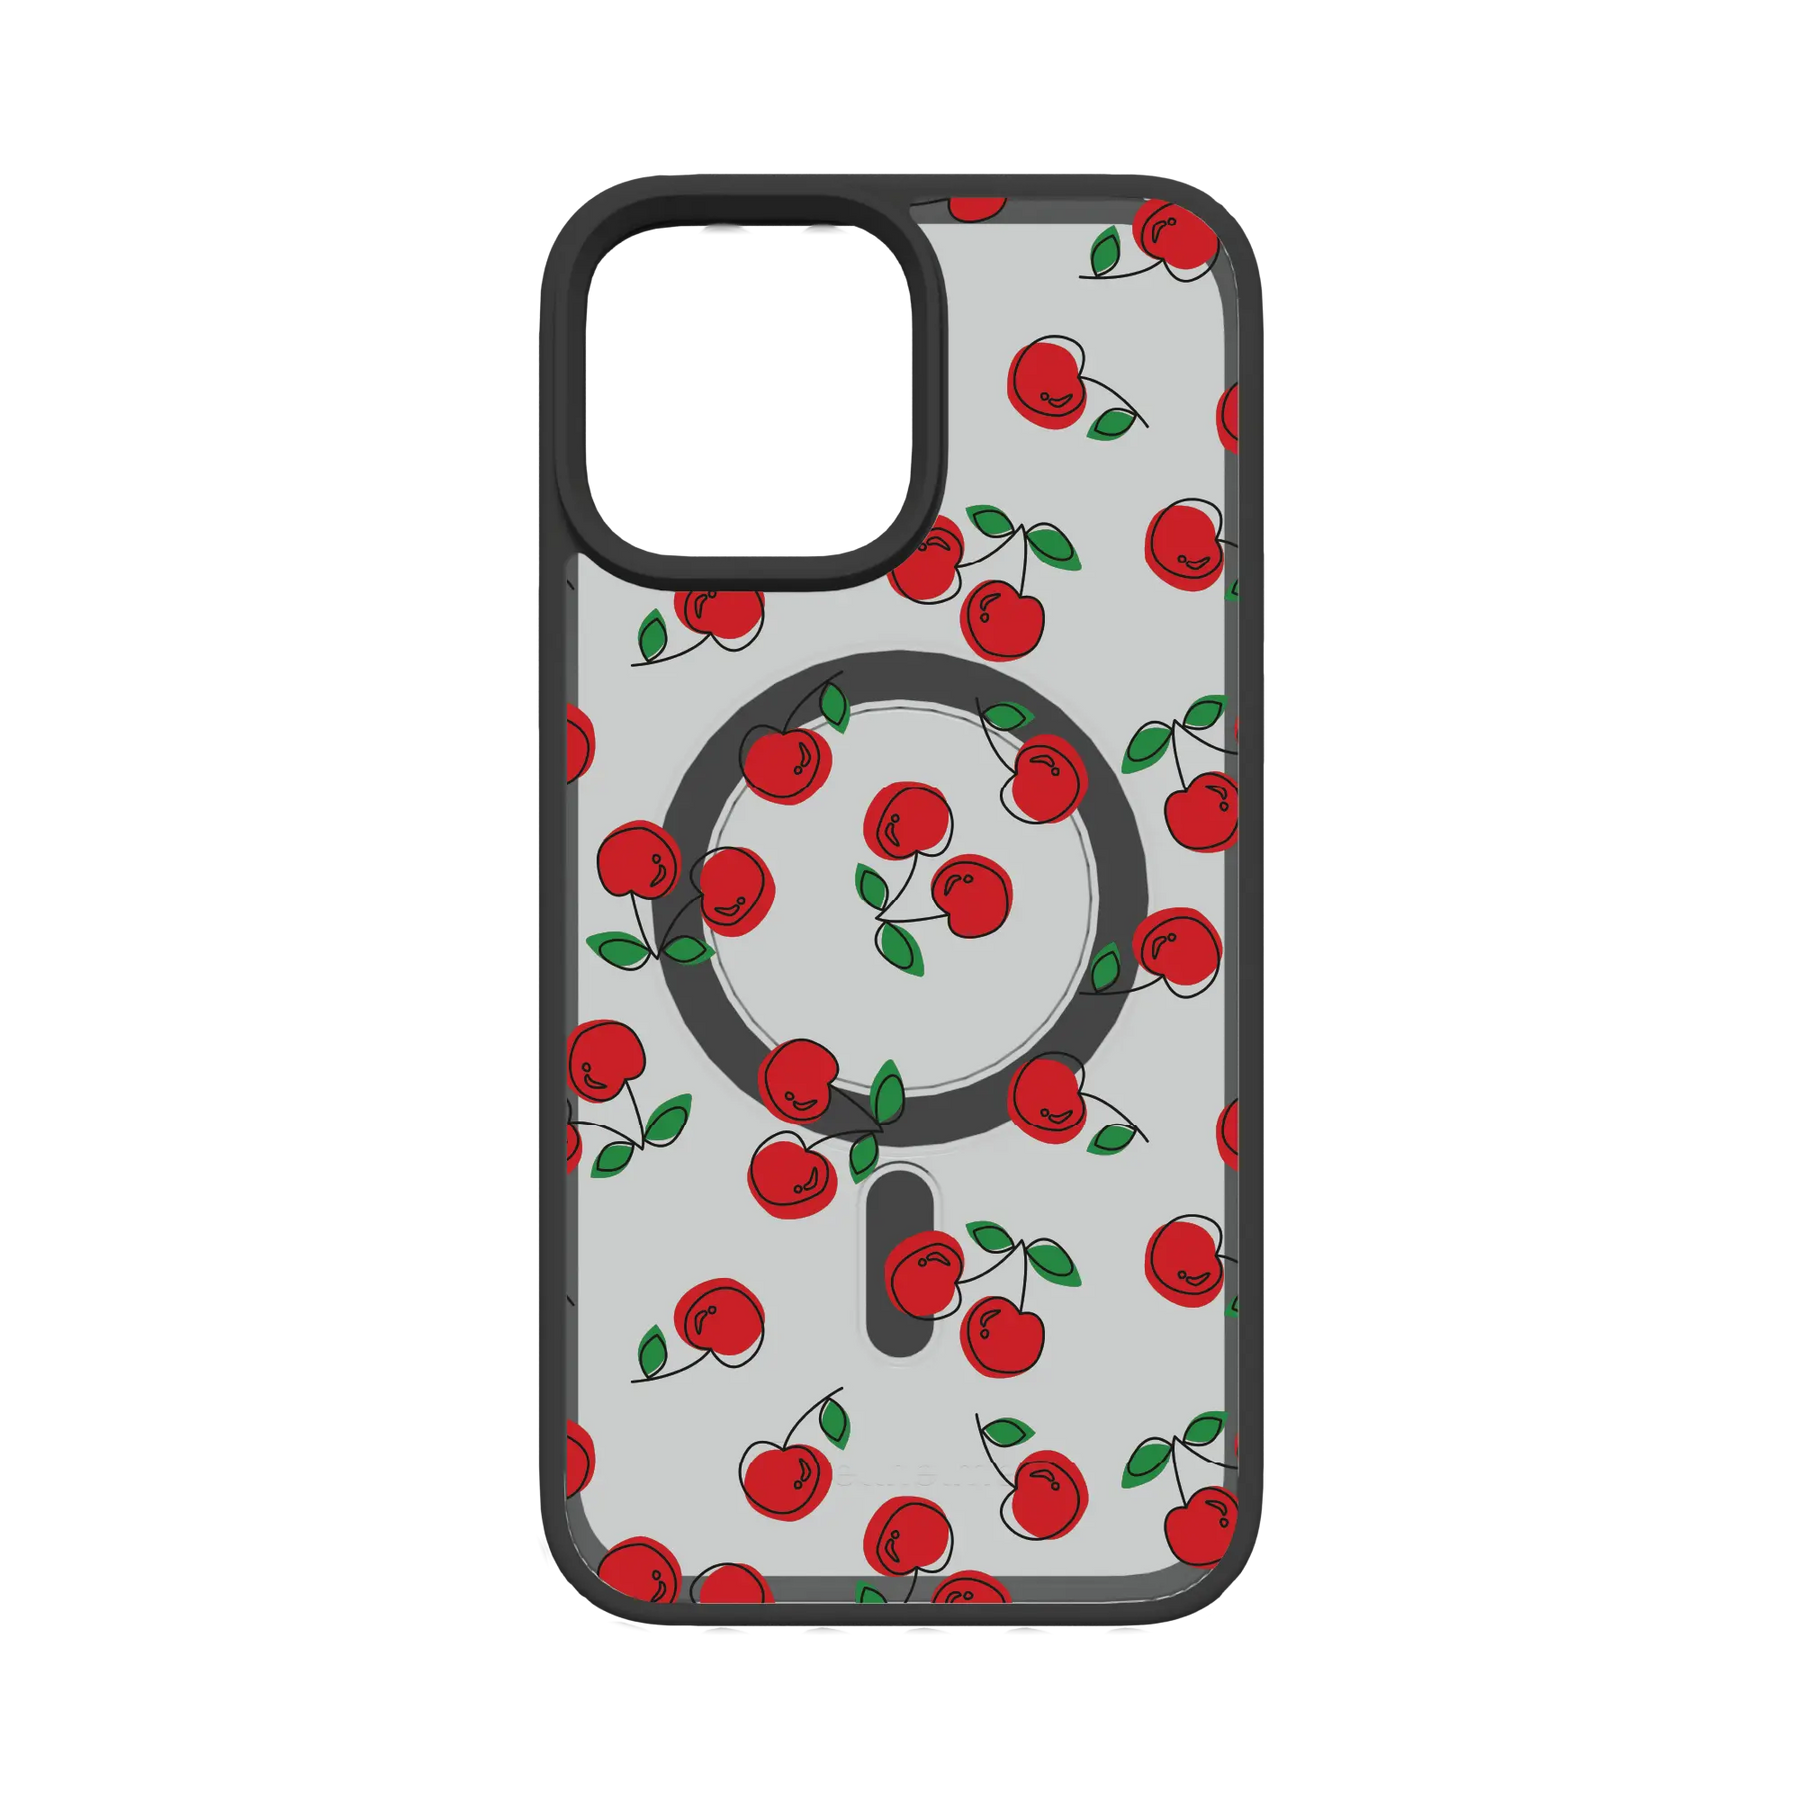 Apple-iPhone-12-Pro-Max-Crystal-Clear Bowl O' Cherries | Custom MagSafe Red Cherry Case for Apple iPhone 12 Series cellhelmet cellhelmet